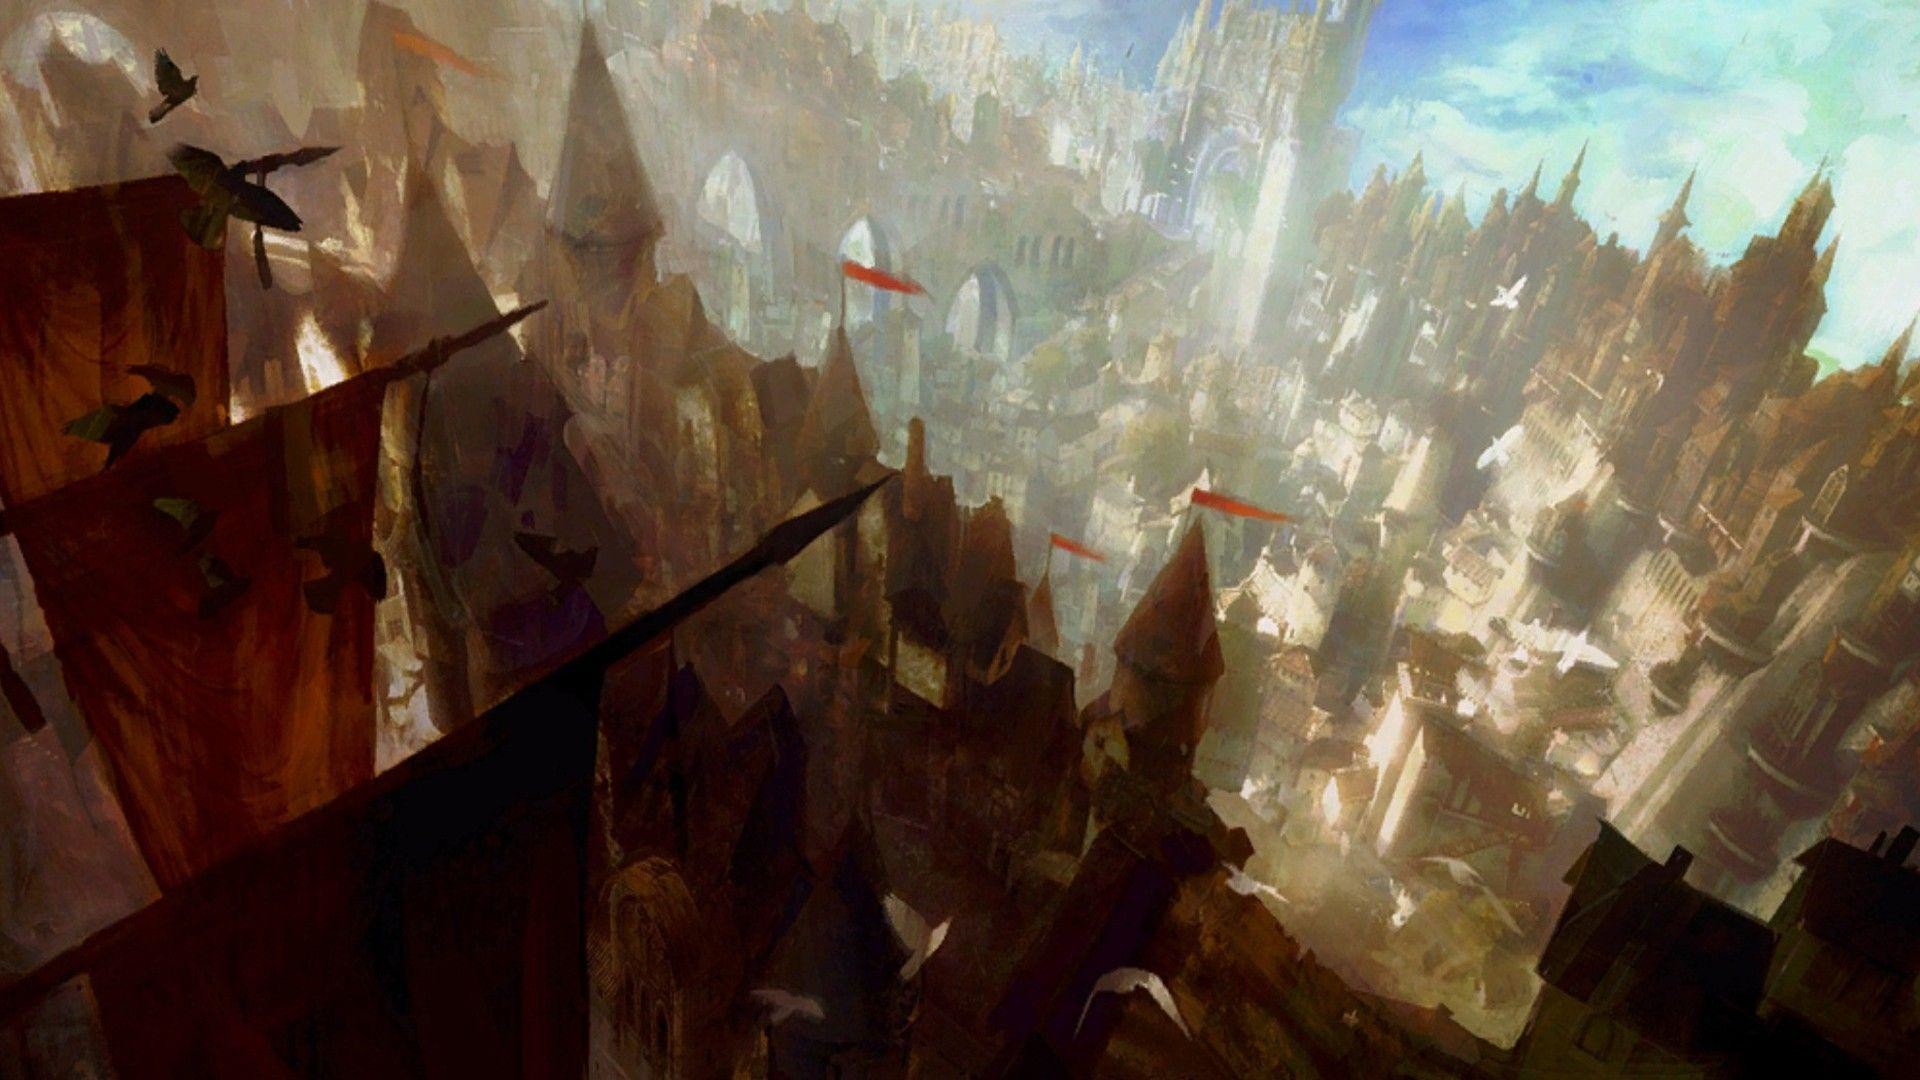 1920x1080 362 Guild Wars 2 Wallpapers | Guild Wars 2 Backgrounds Page 5